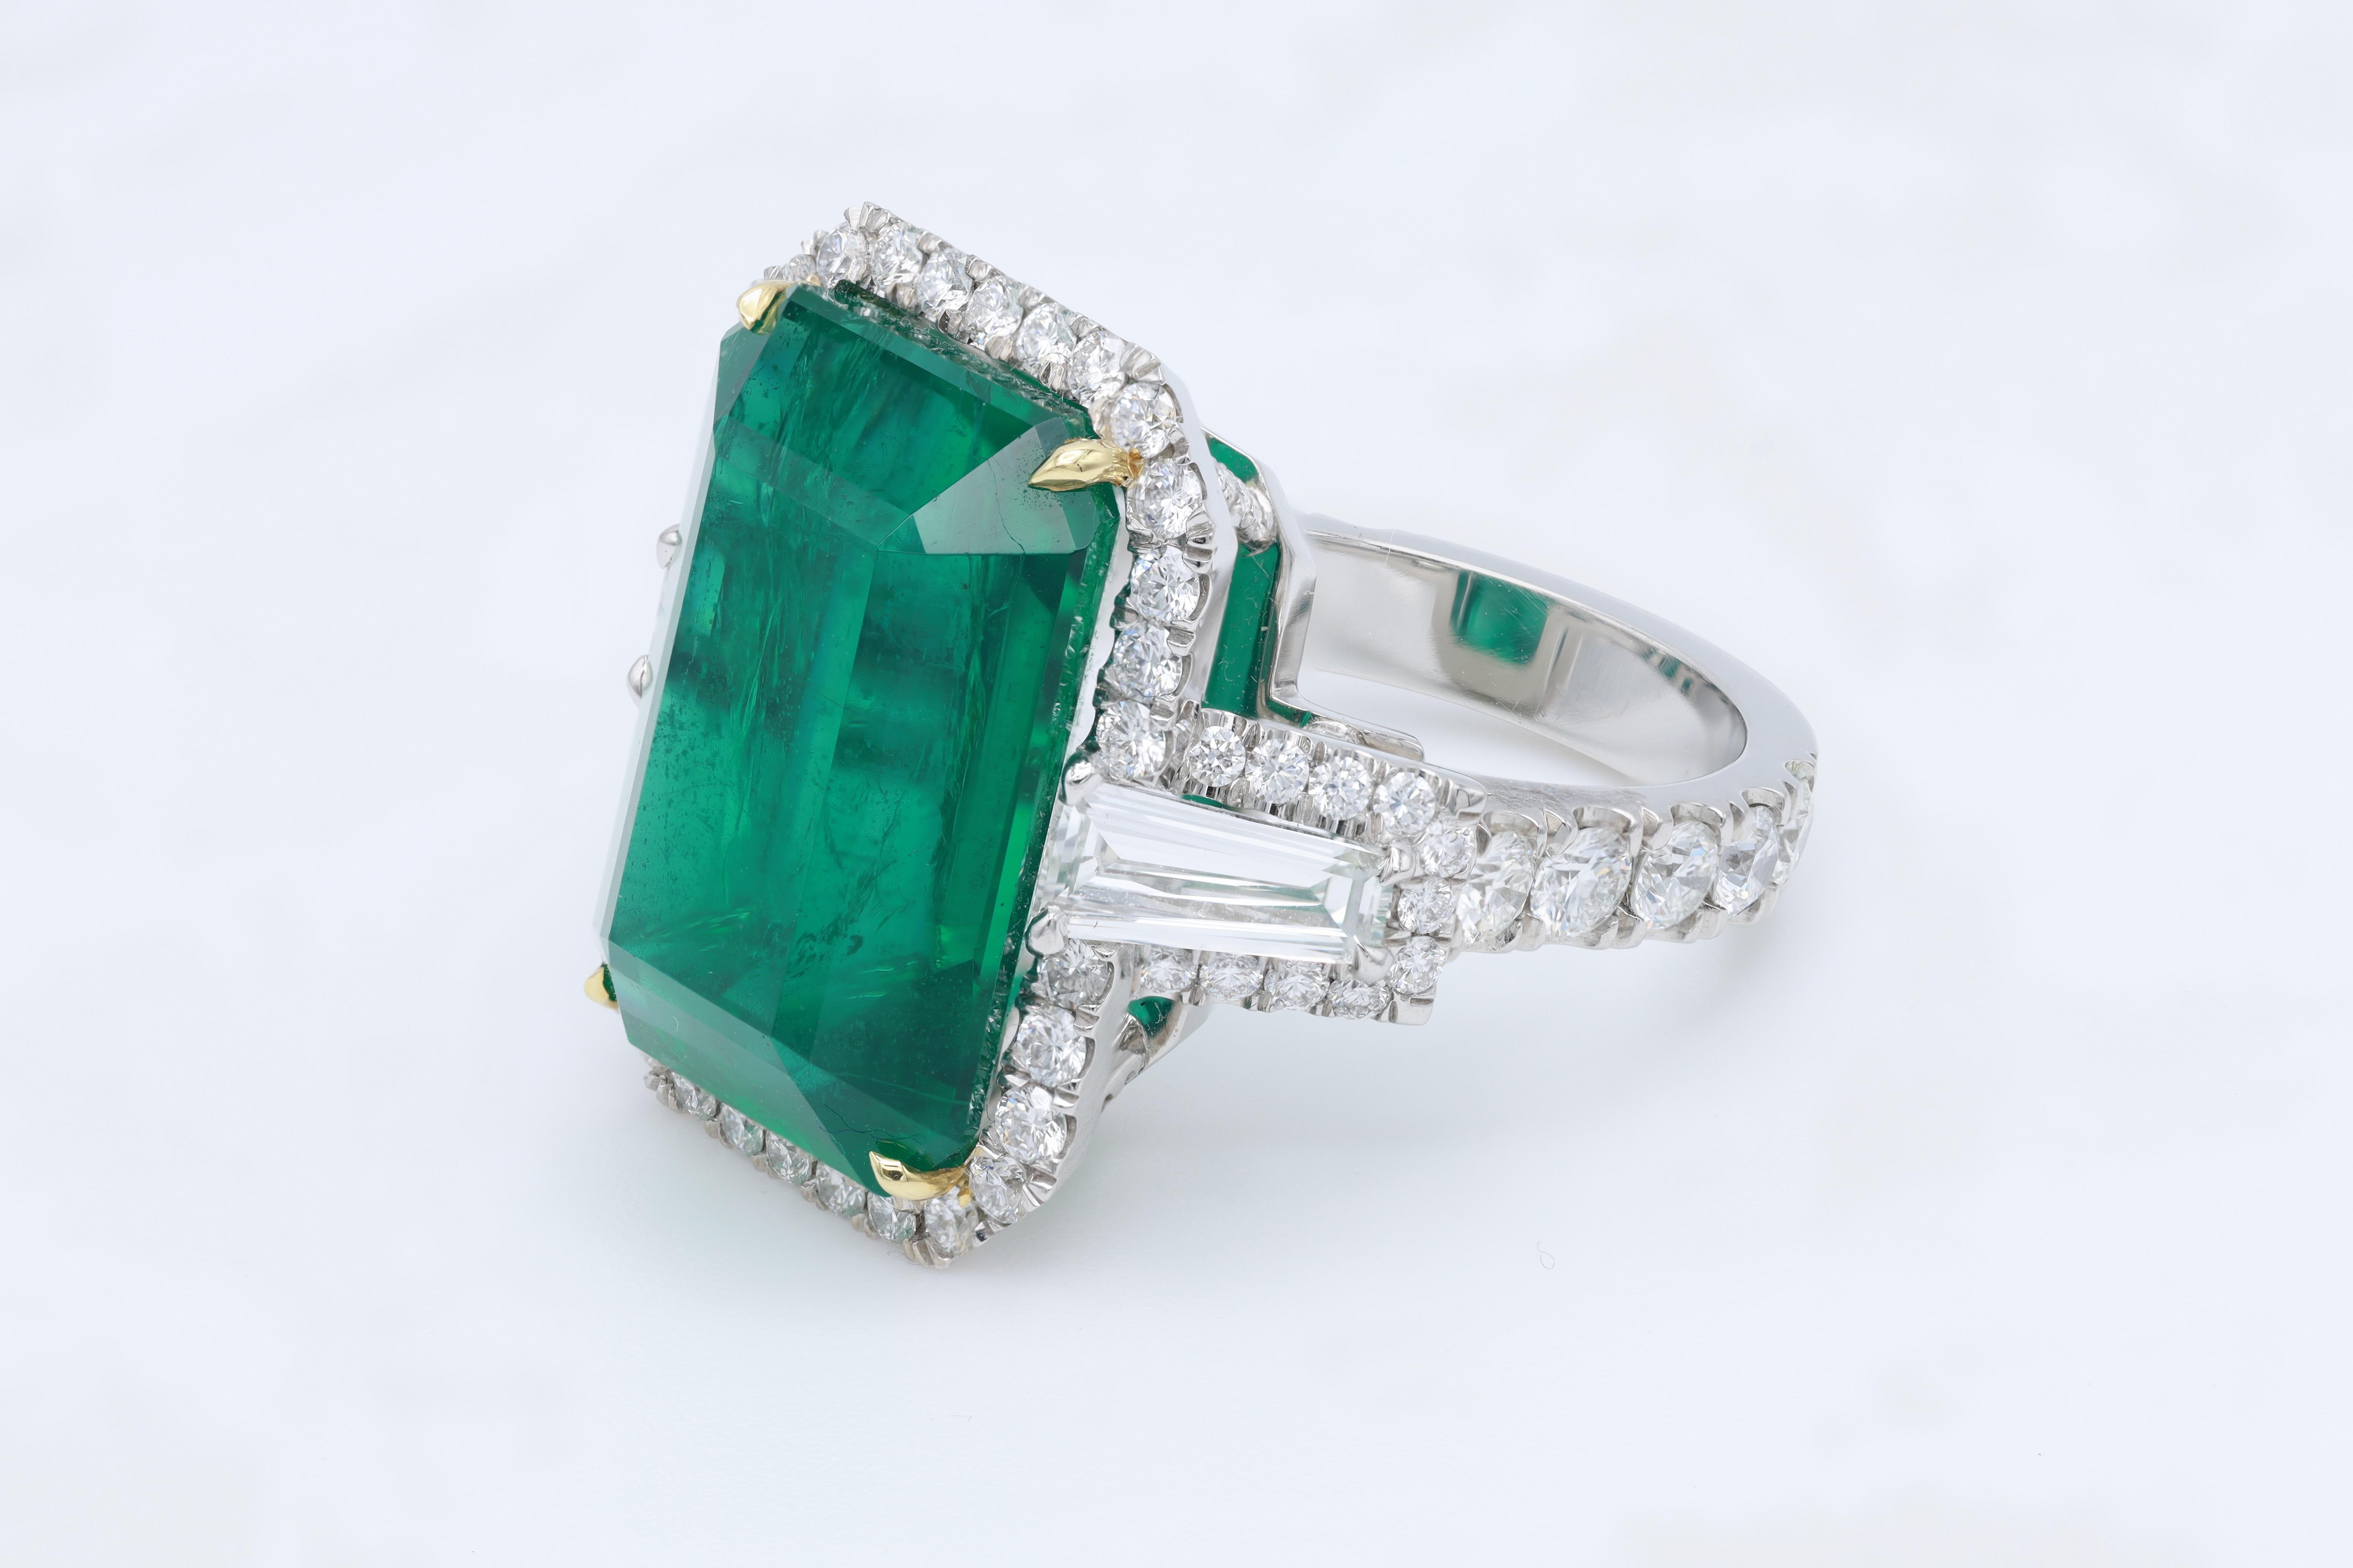 Platinum and 18 kt yellow gold emerald and diamond fashion ring featuring a 18.38 ct emerald (F1/F2-no certficate) with 3.25 cts tw of diamonds (1.08 cts tapered baguettes and 2.17 cts of round diamonds) in a halo setting.
Diana M. is a leading